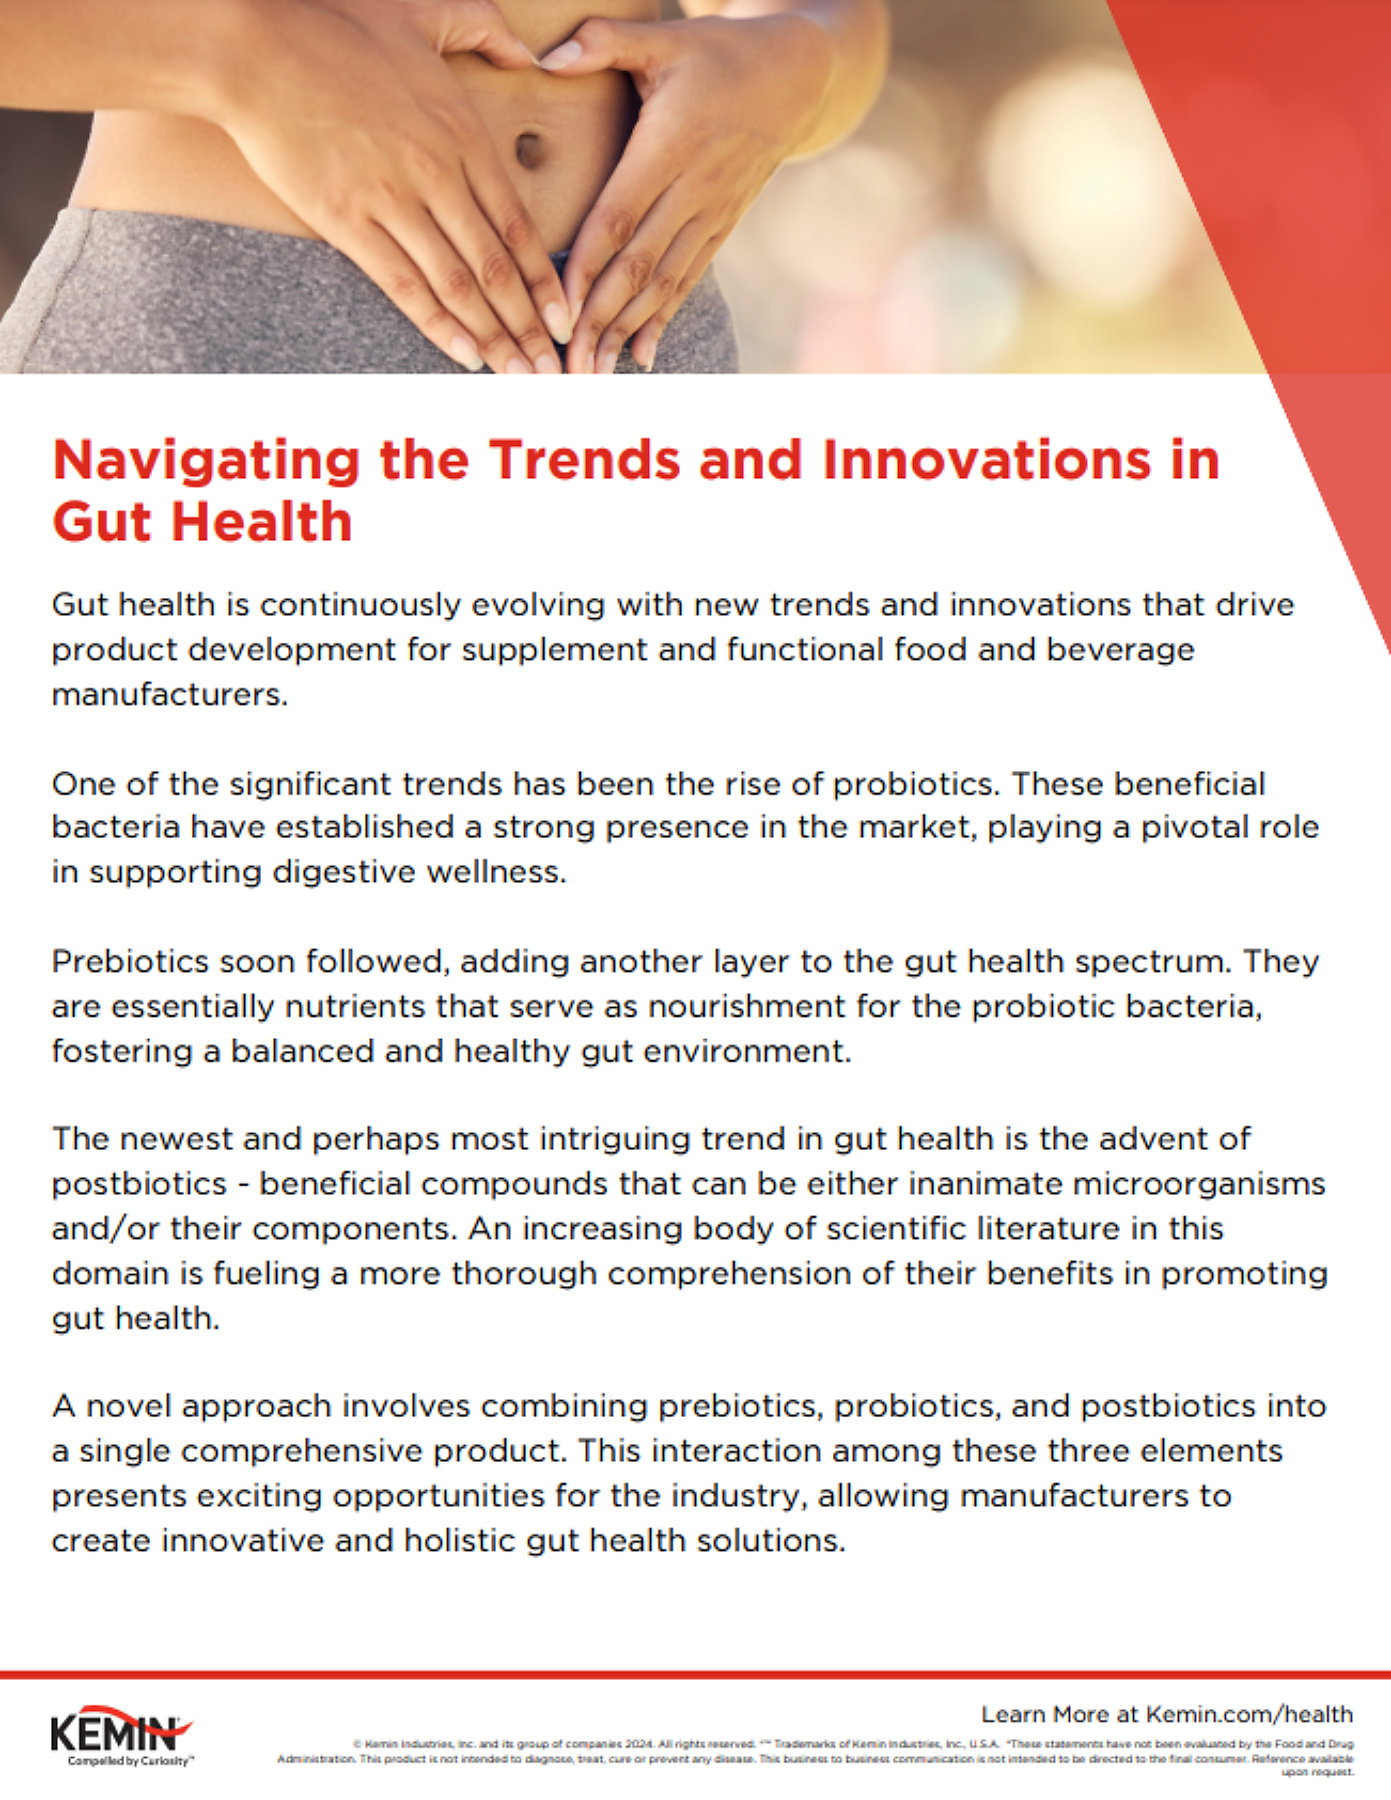 Navigating the Trends and Innovations in Gut Health - 1